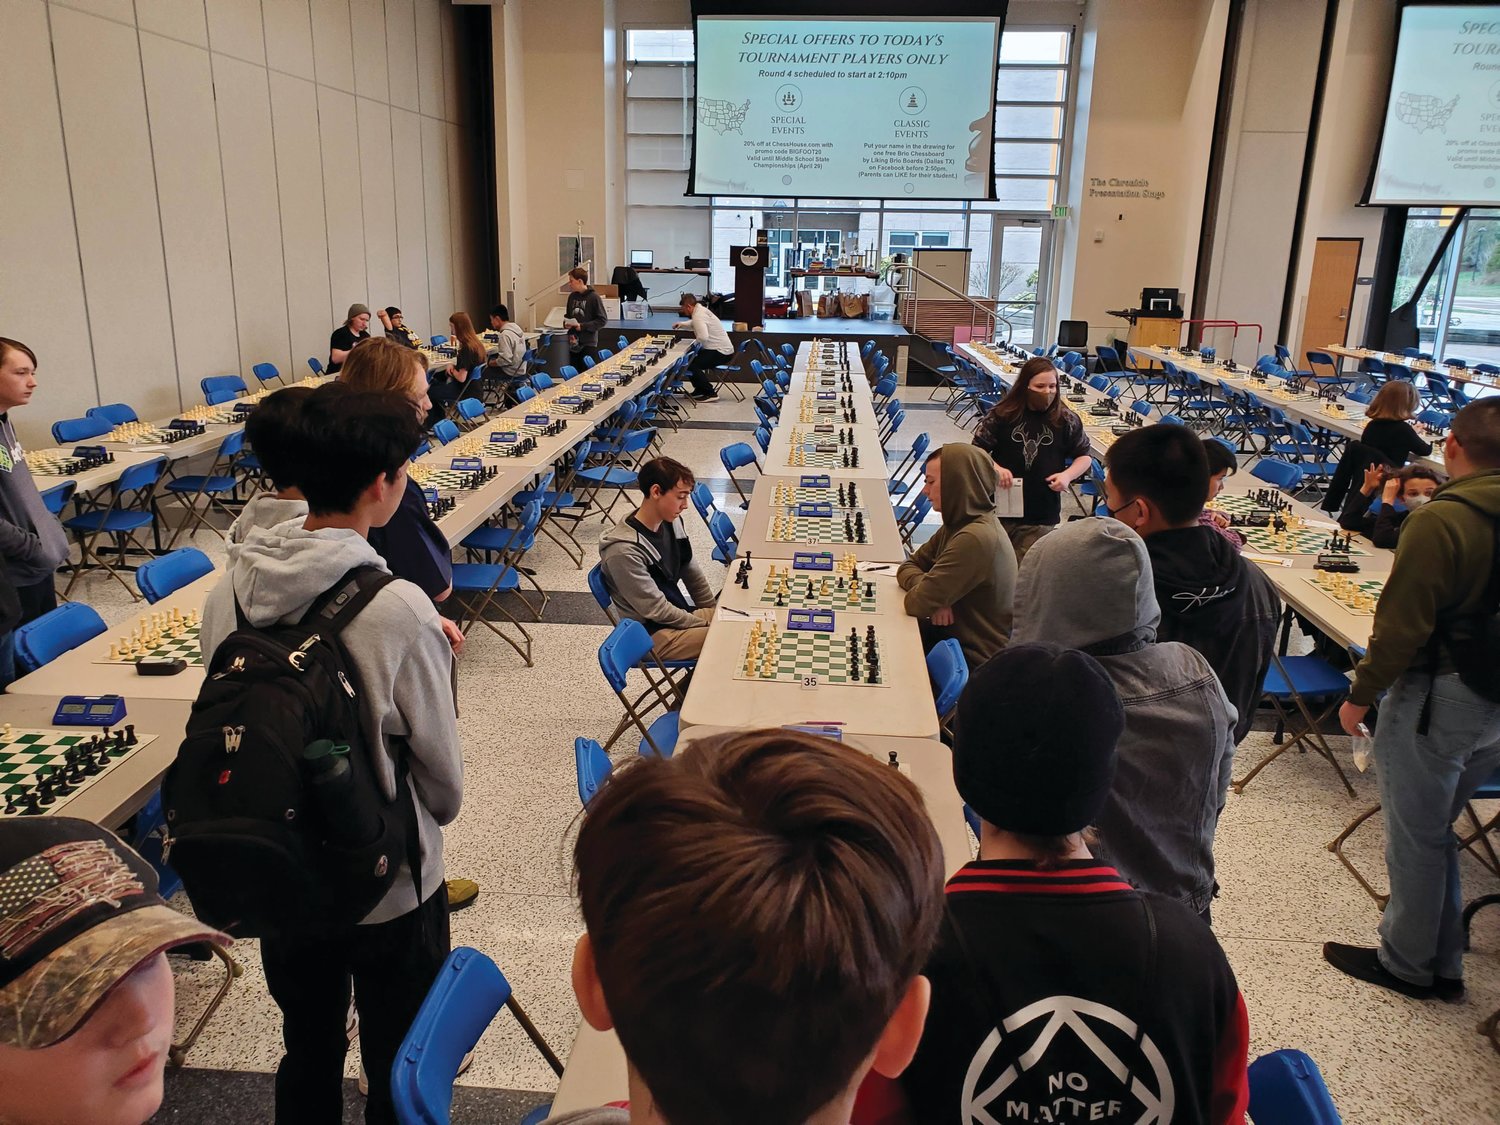 Area students from North Clark County competed at the 2023 Southwest Washington Scholastic Chess Championships at Centralia College on Saturday, Feb. 4.